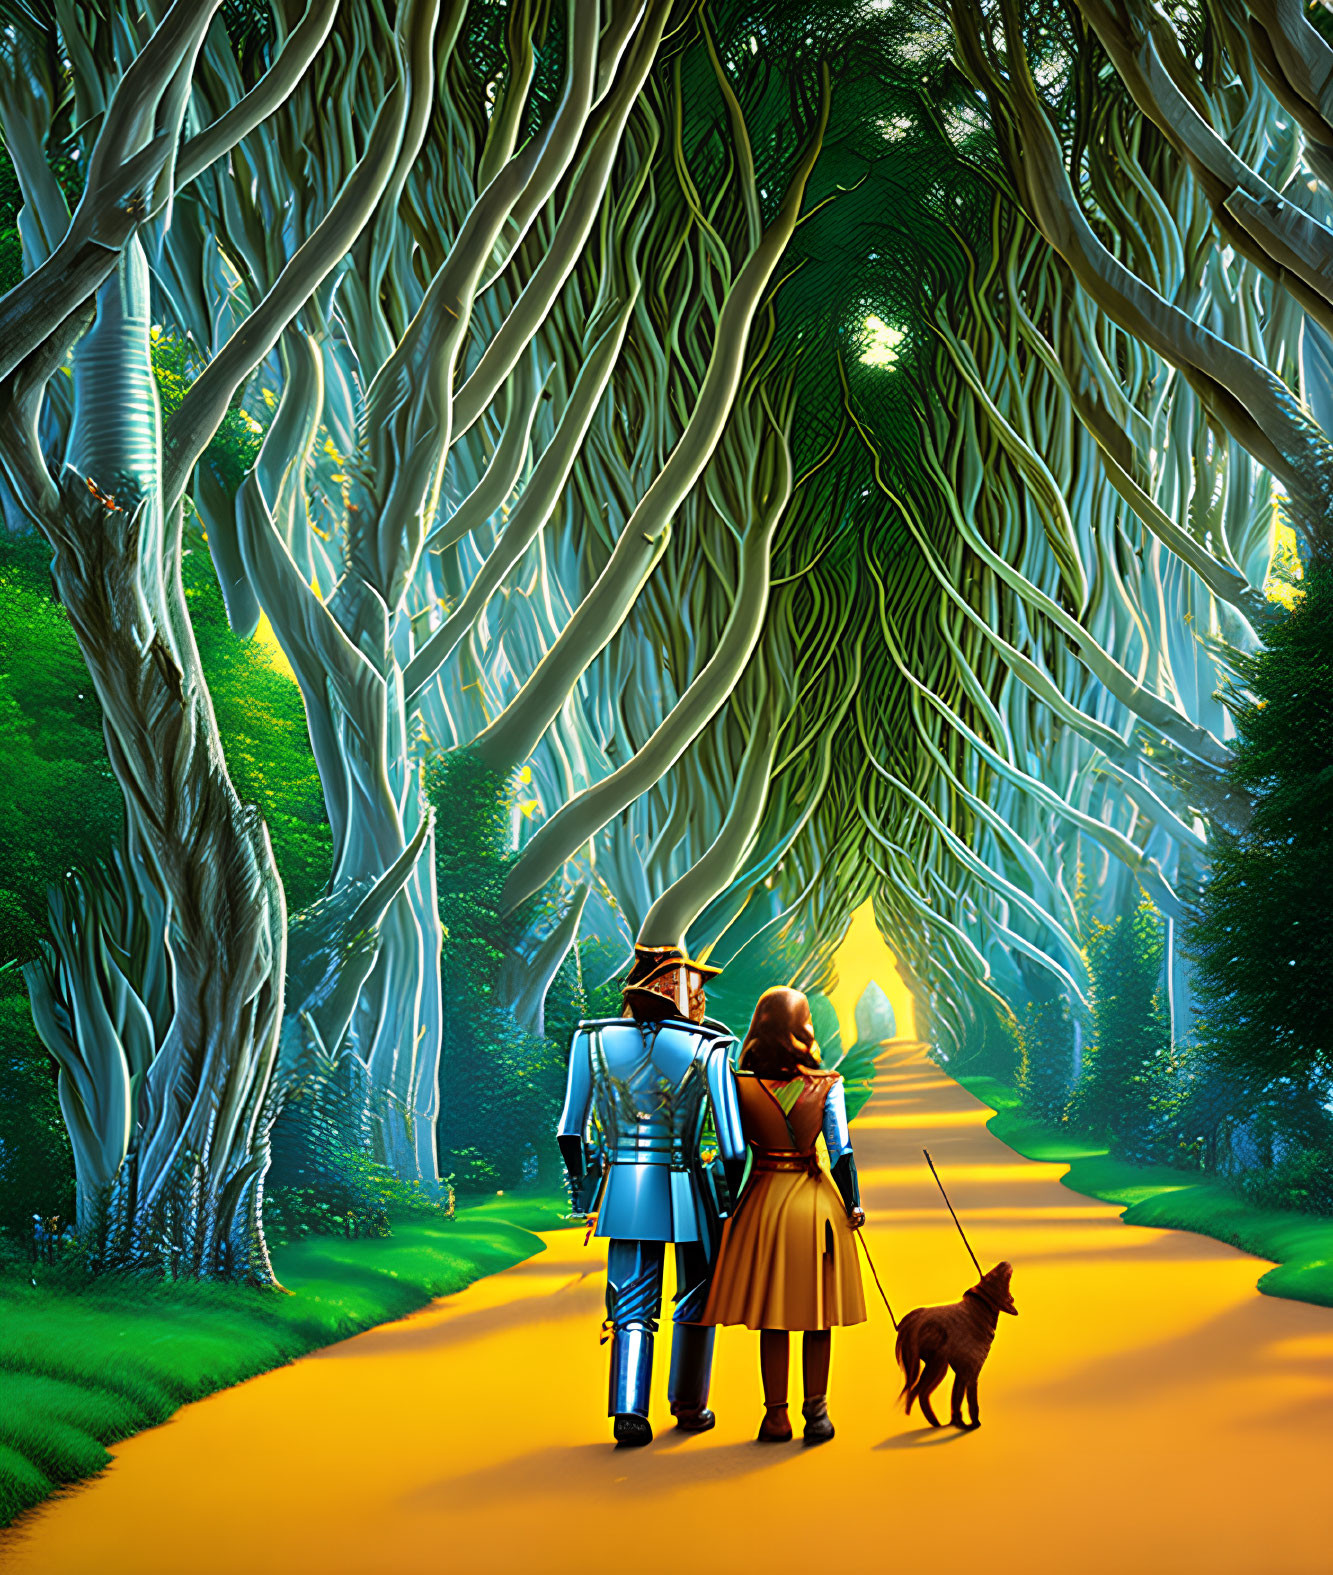 Man in tin armor and girl with small dog on yellow brick road in enchanted forest